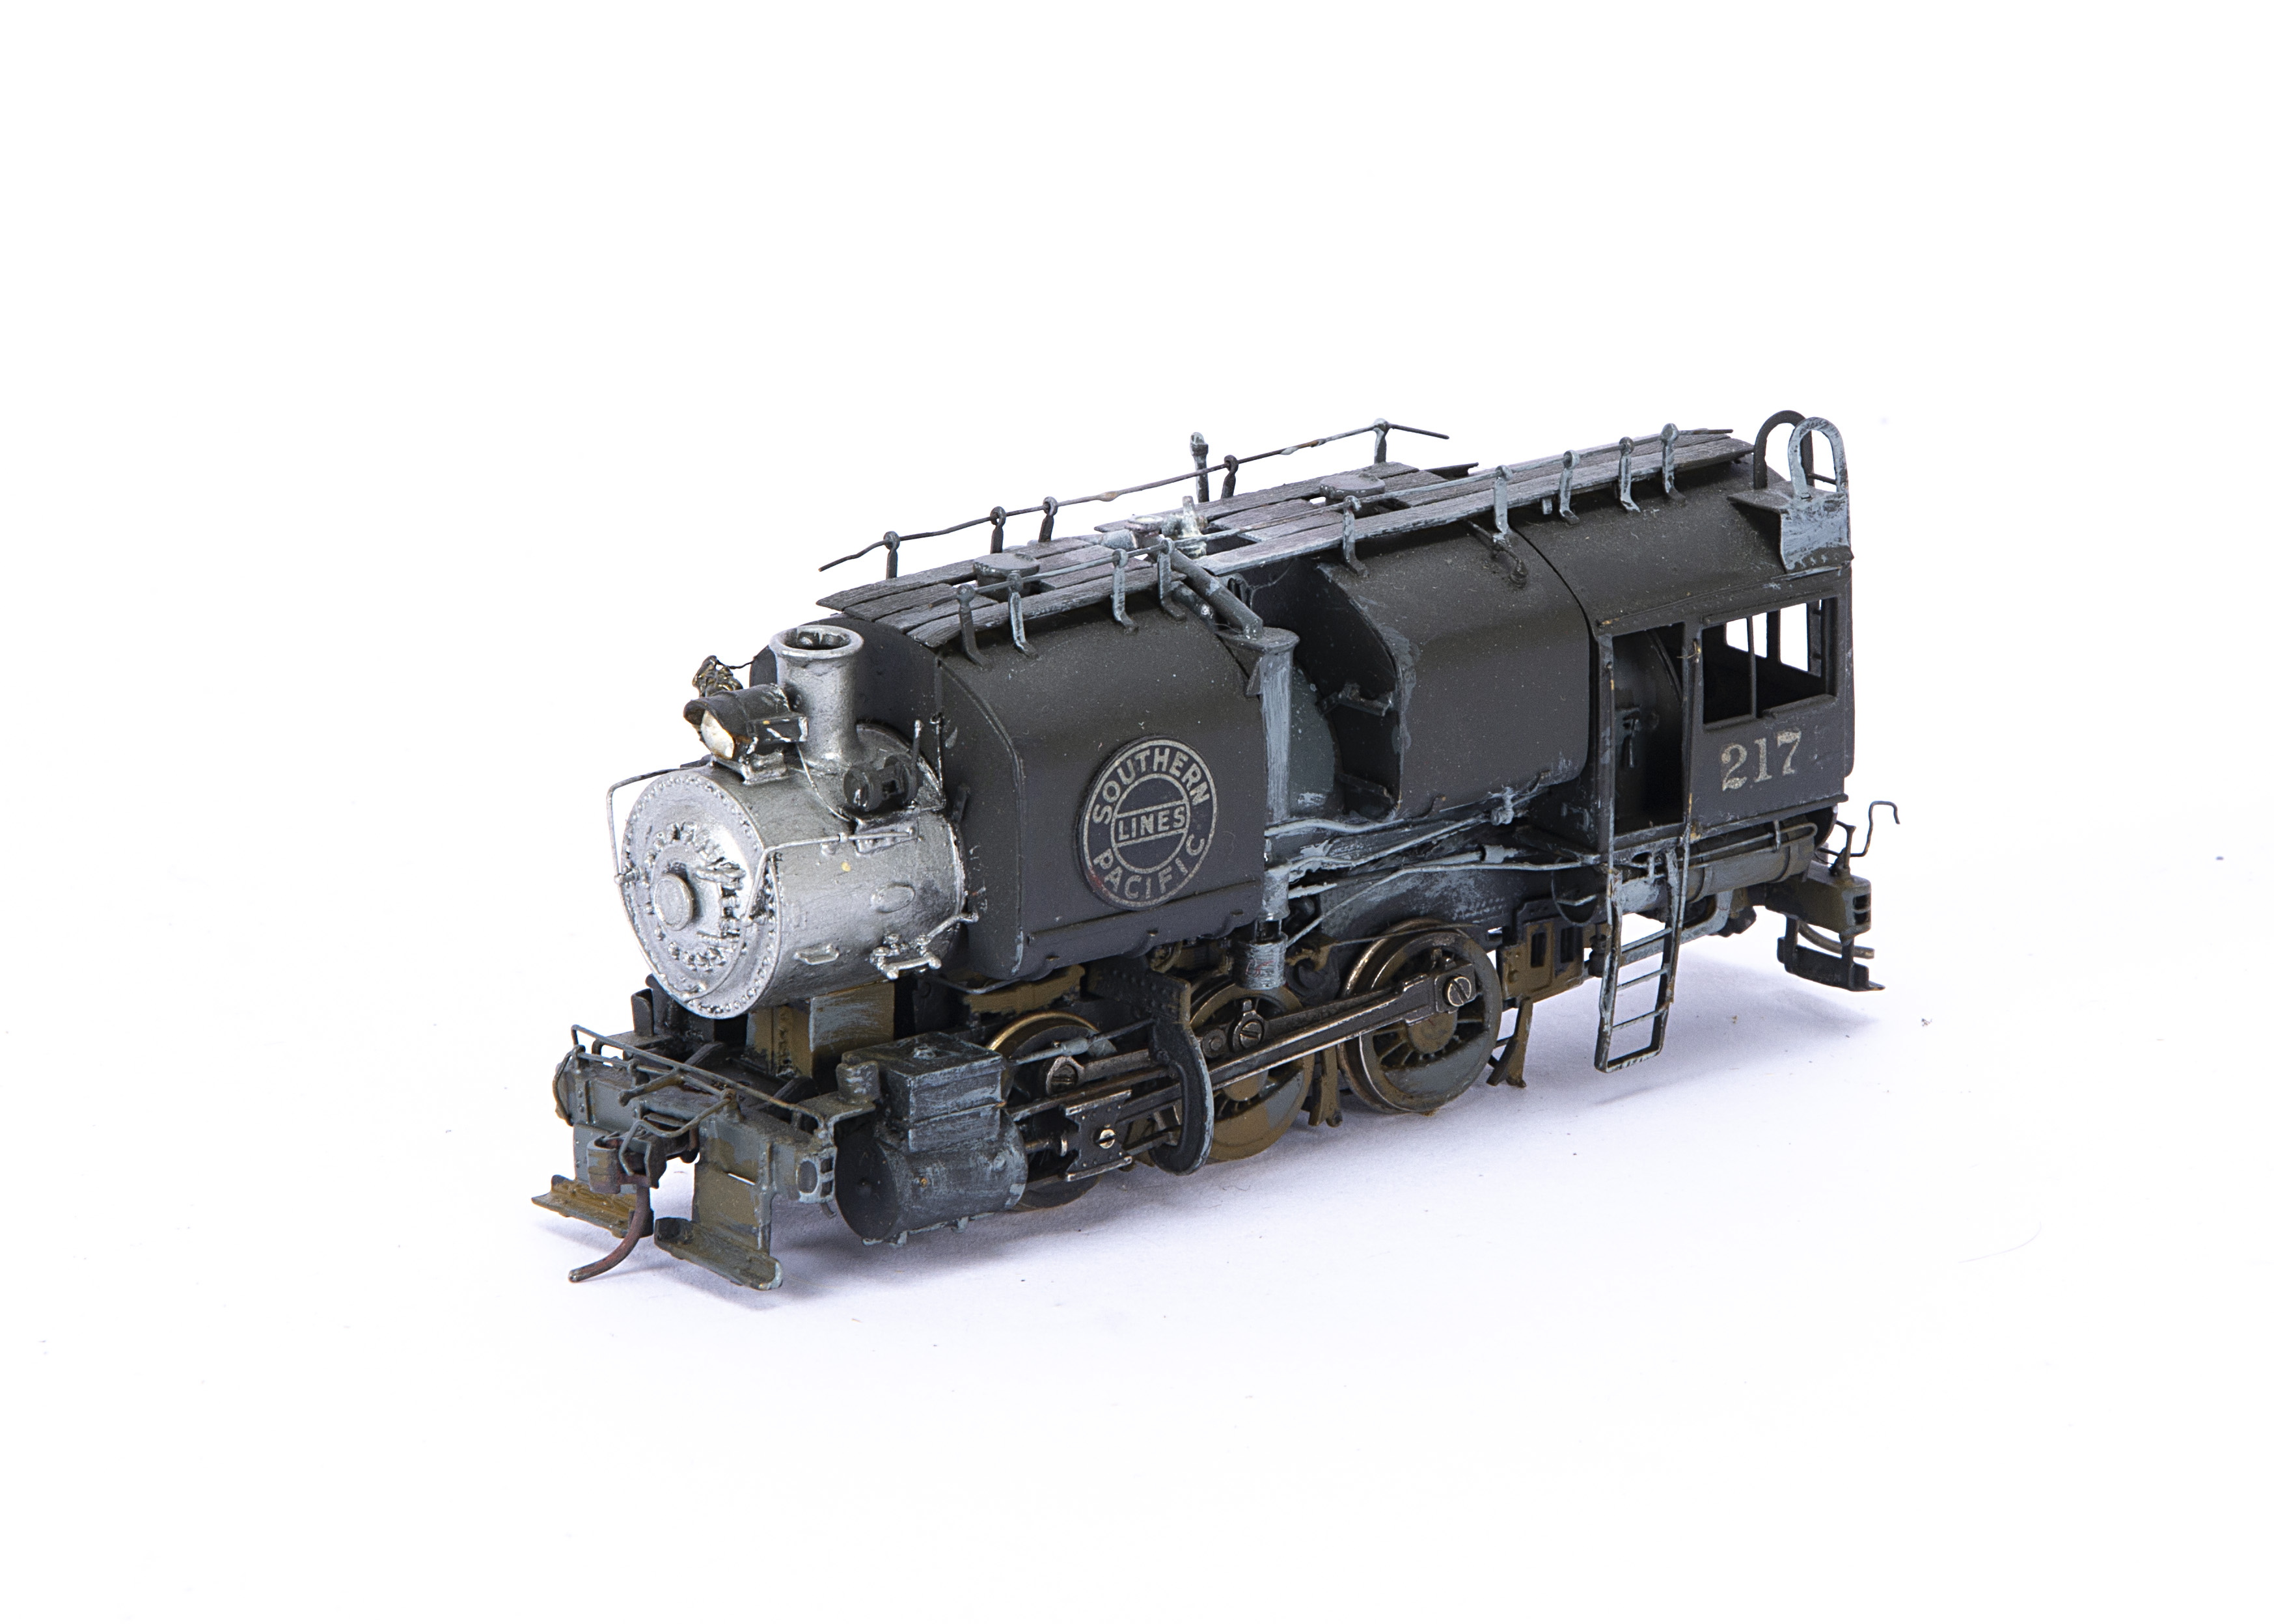 Westside Model Company H0 Gauge Southern Pacific S-2 #217T, Samhongsa, Korea, poorly painted and